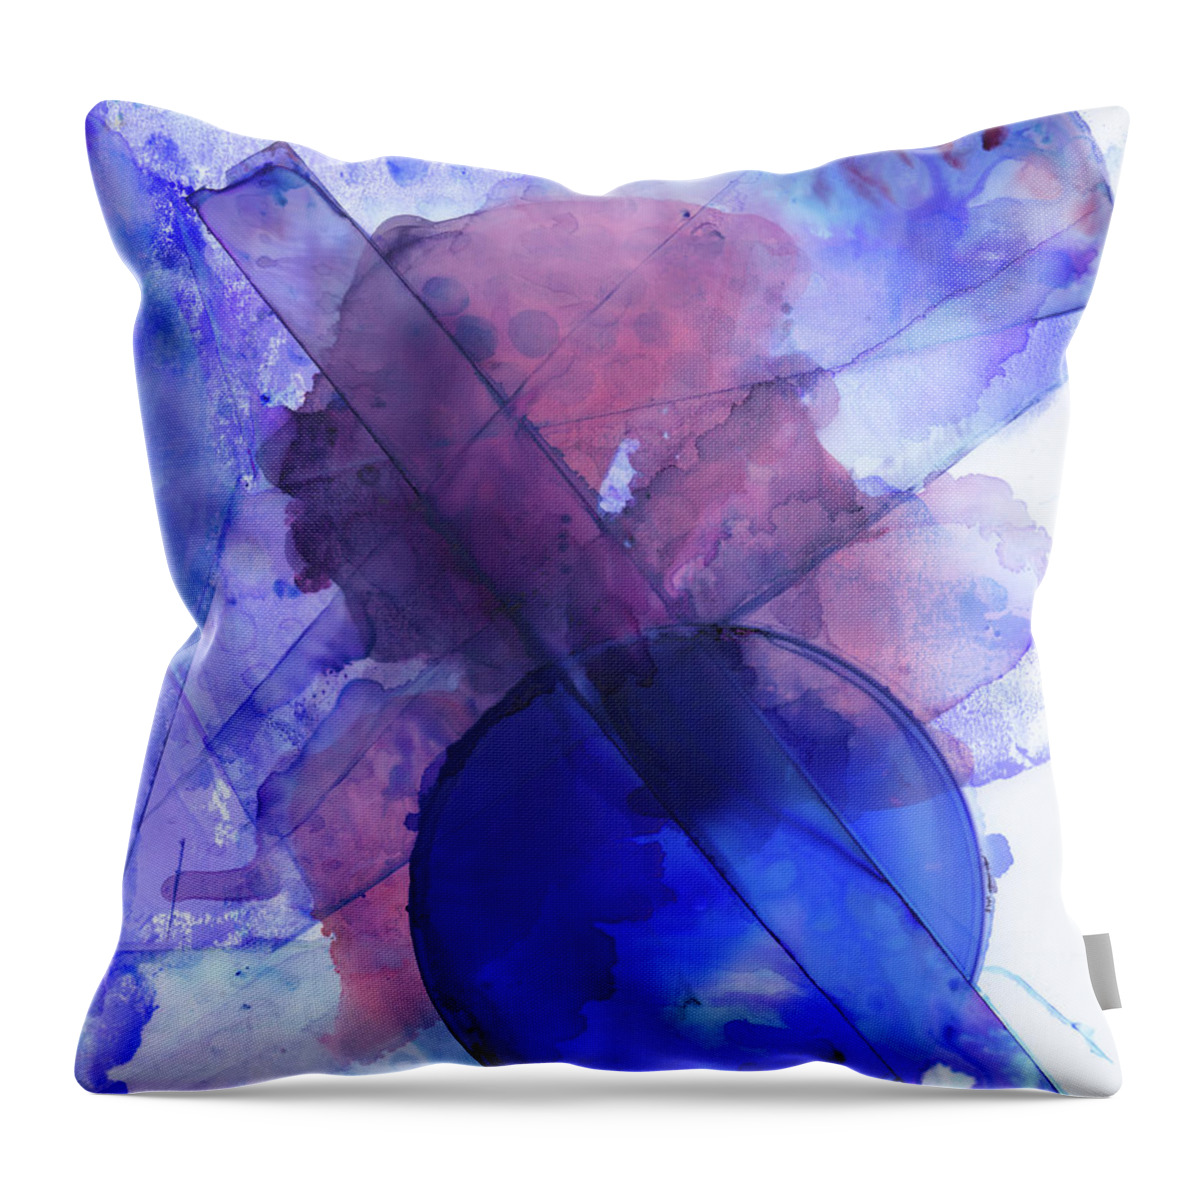 Blue Throw Pillow featuring the painting X Marks the Spot by Christy Sawyer